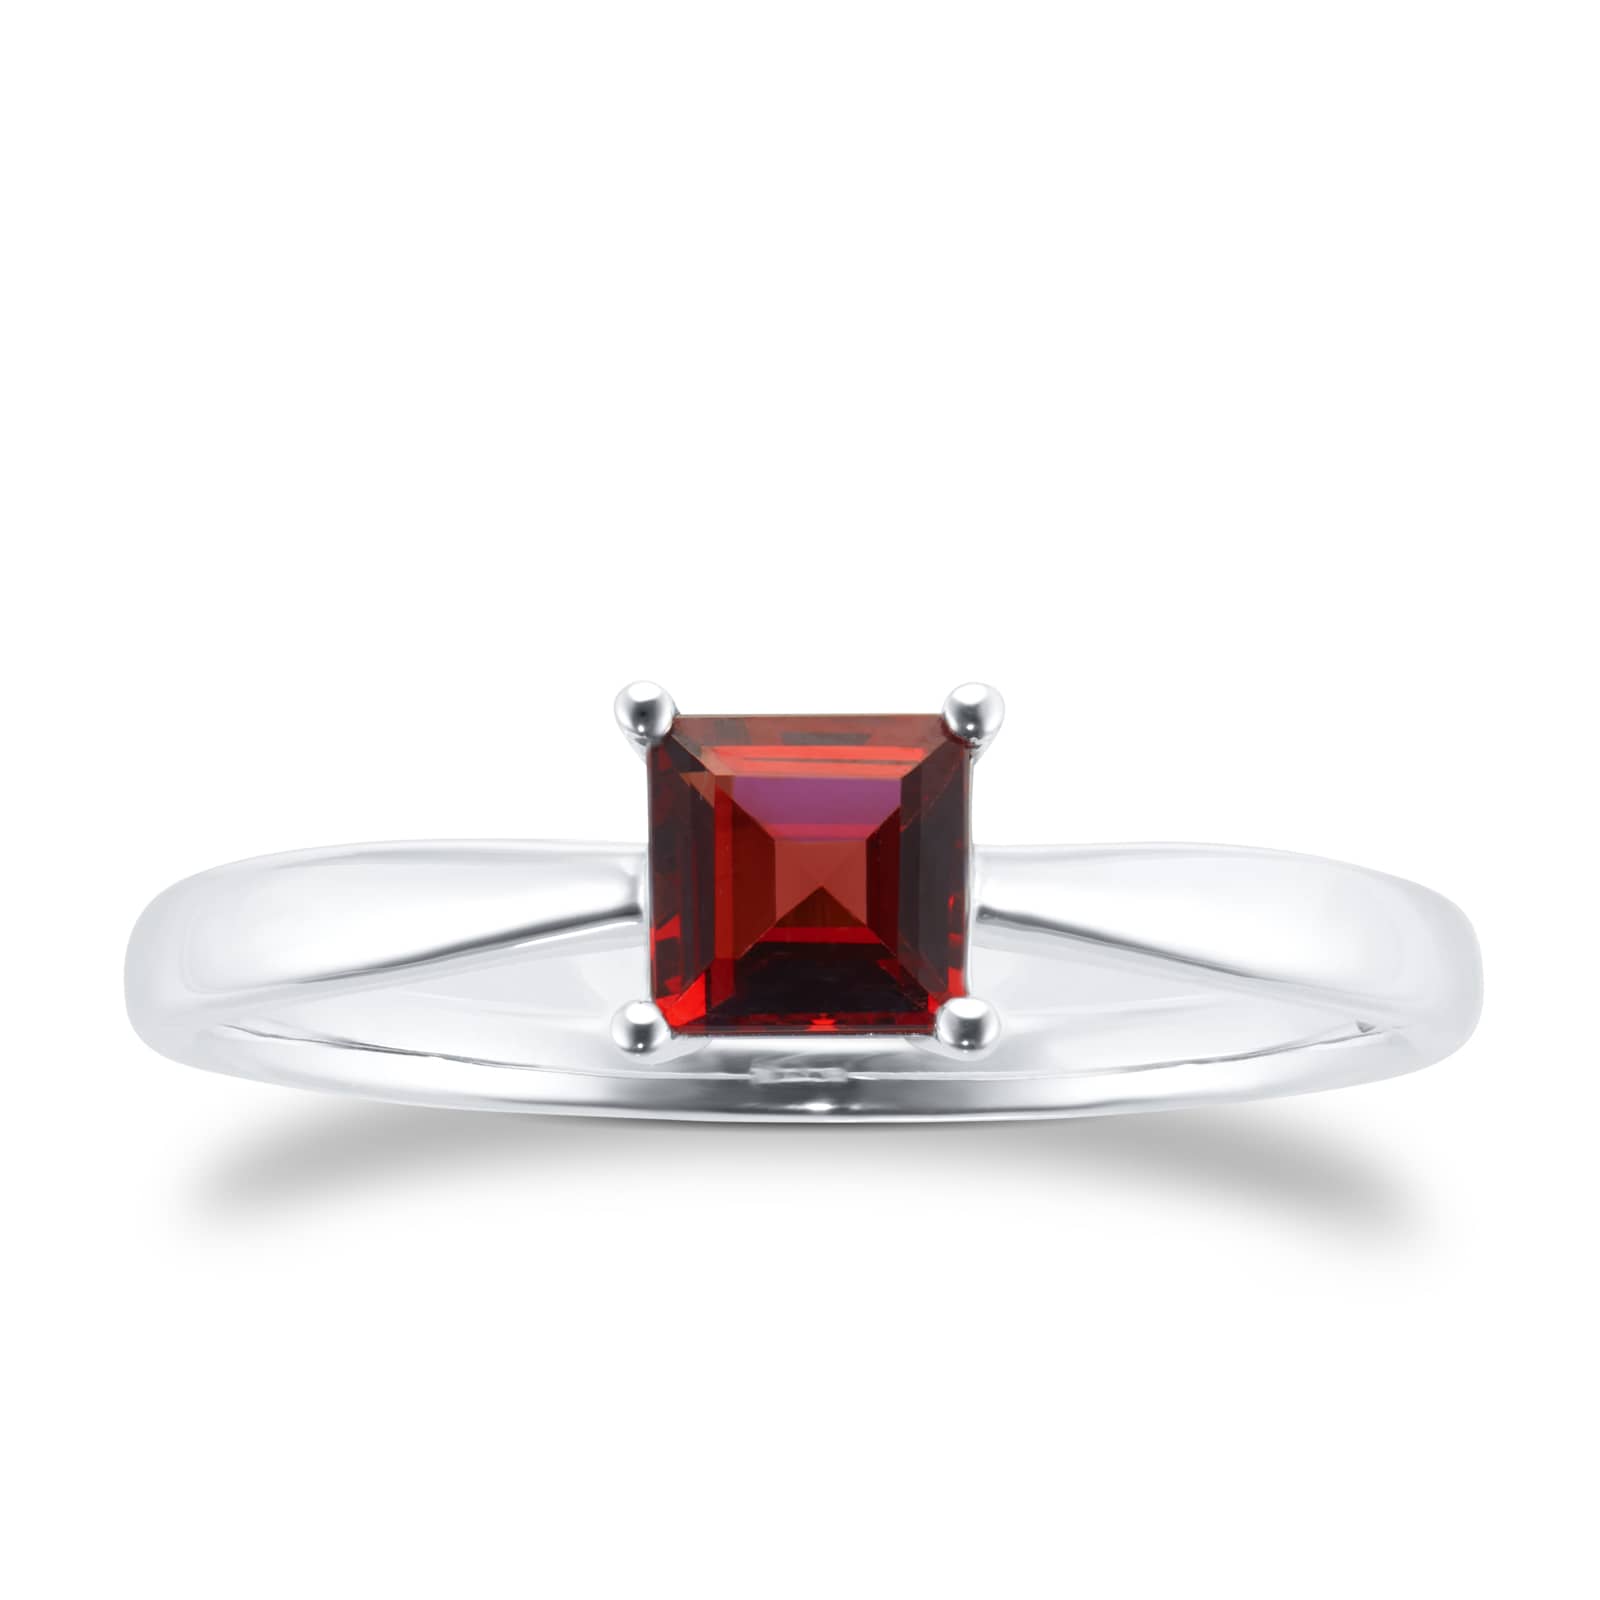 9ct White Gold 4 Claw Square Garnet 5mm x 5mm Ring- Ring Size S.5